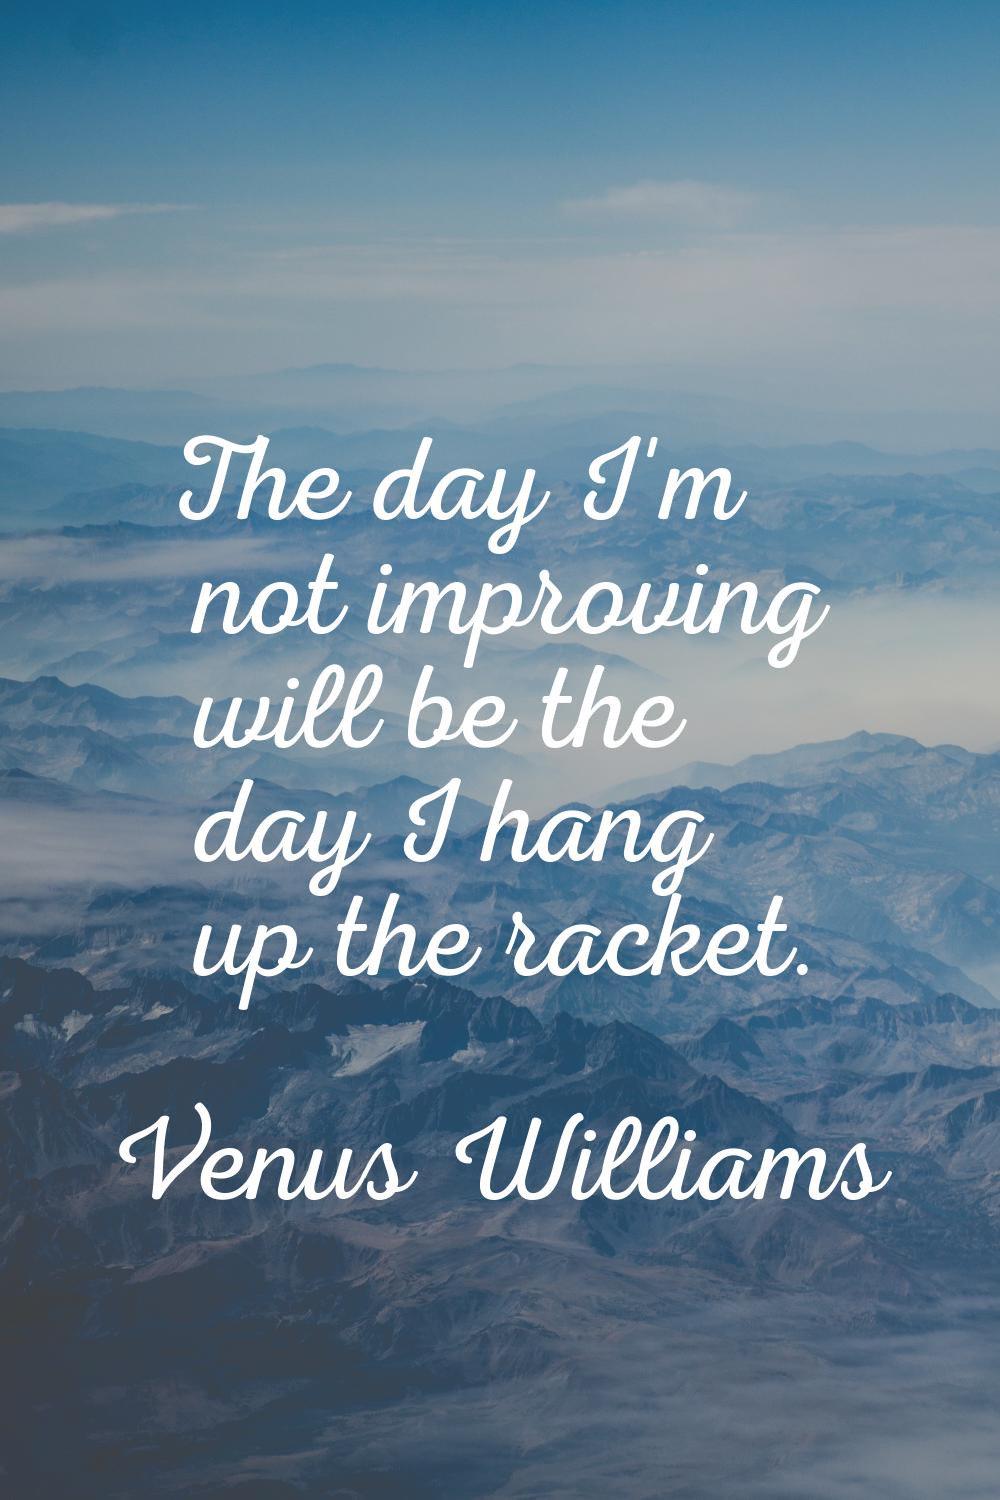 The day I'm not improving will be the day I hang up the racket.